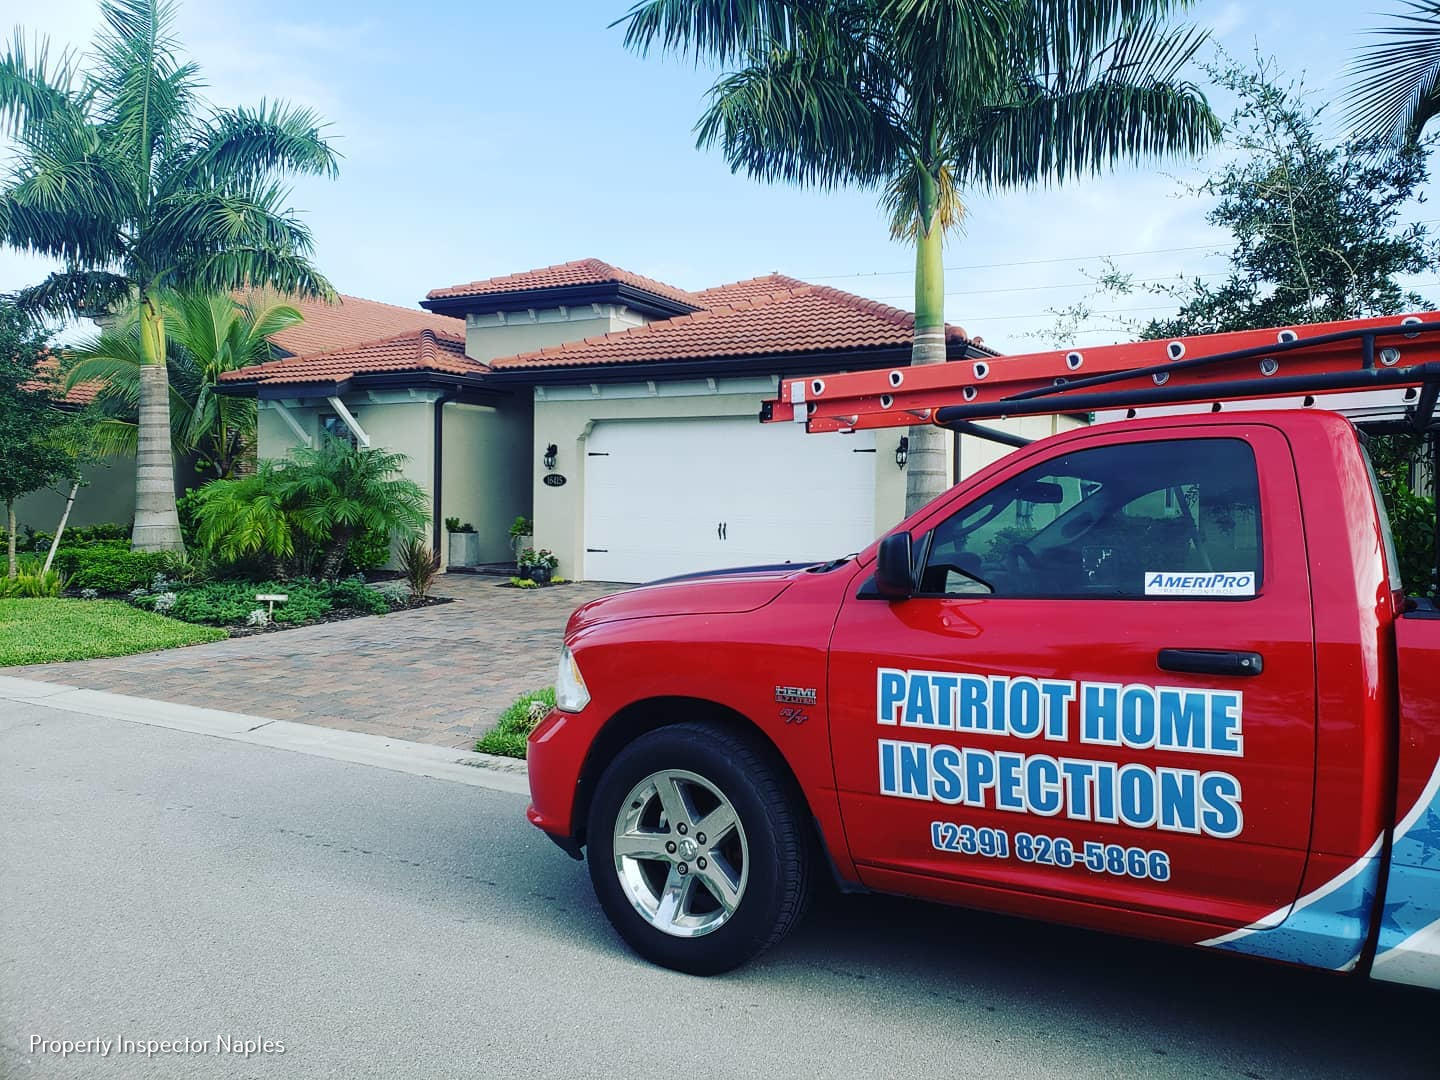 Patriot Home Inspections Explains Qualities of A top Home Inspector.